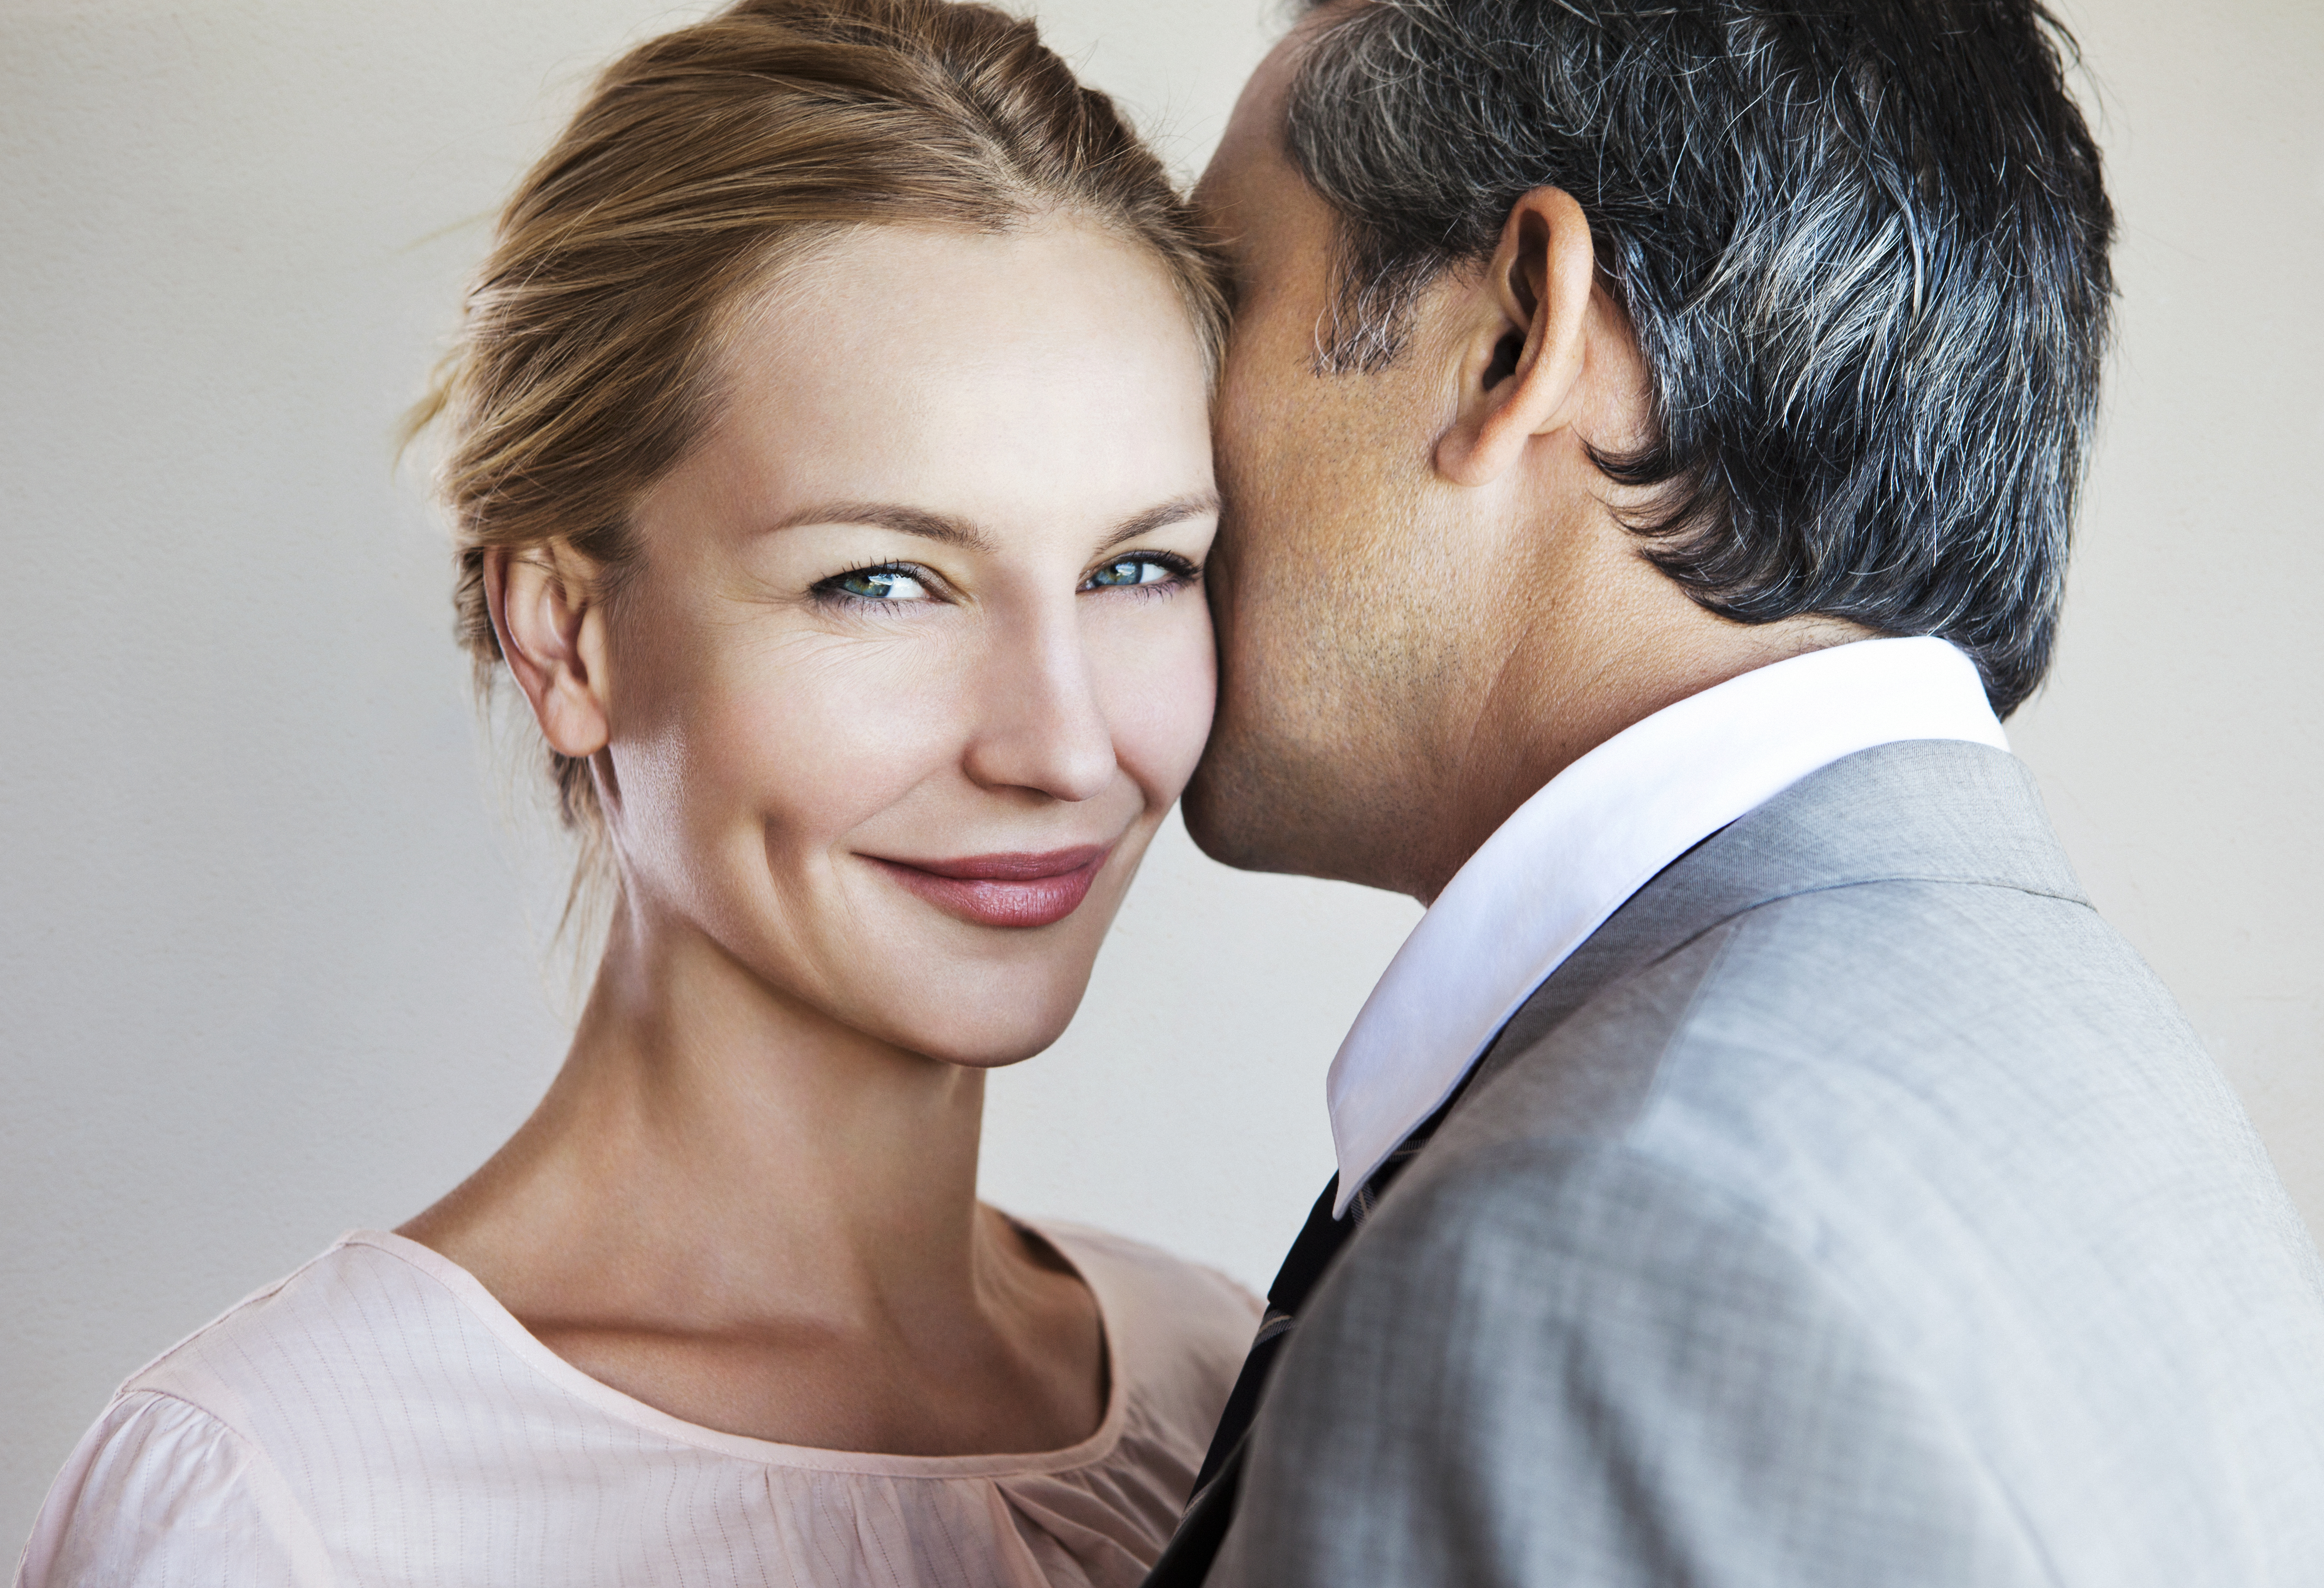 A man whispering to a smiling woman. | Source: Getty Images